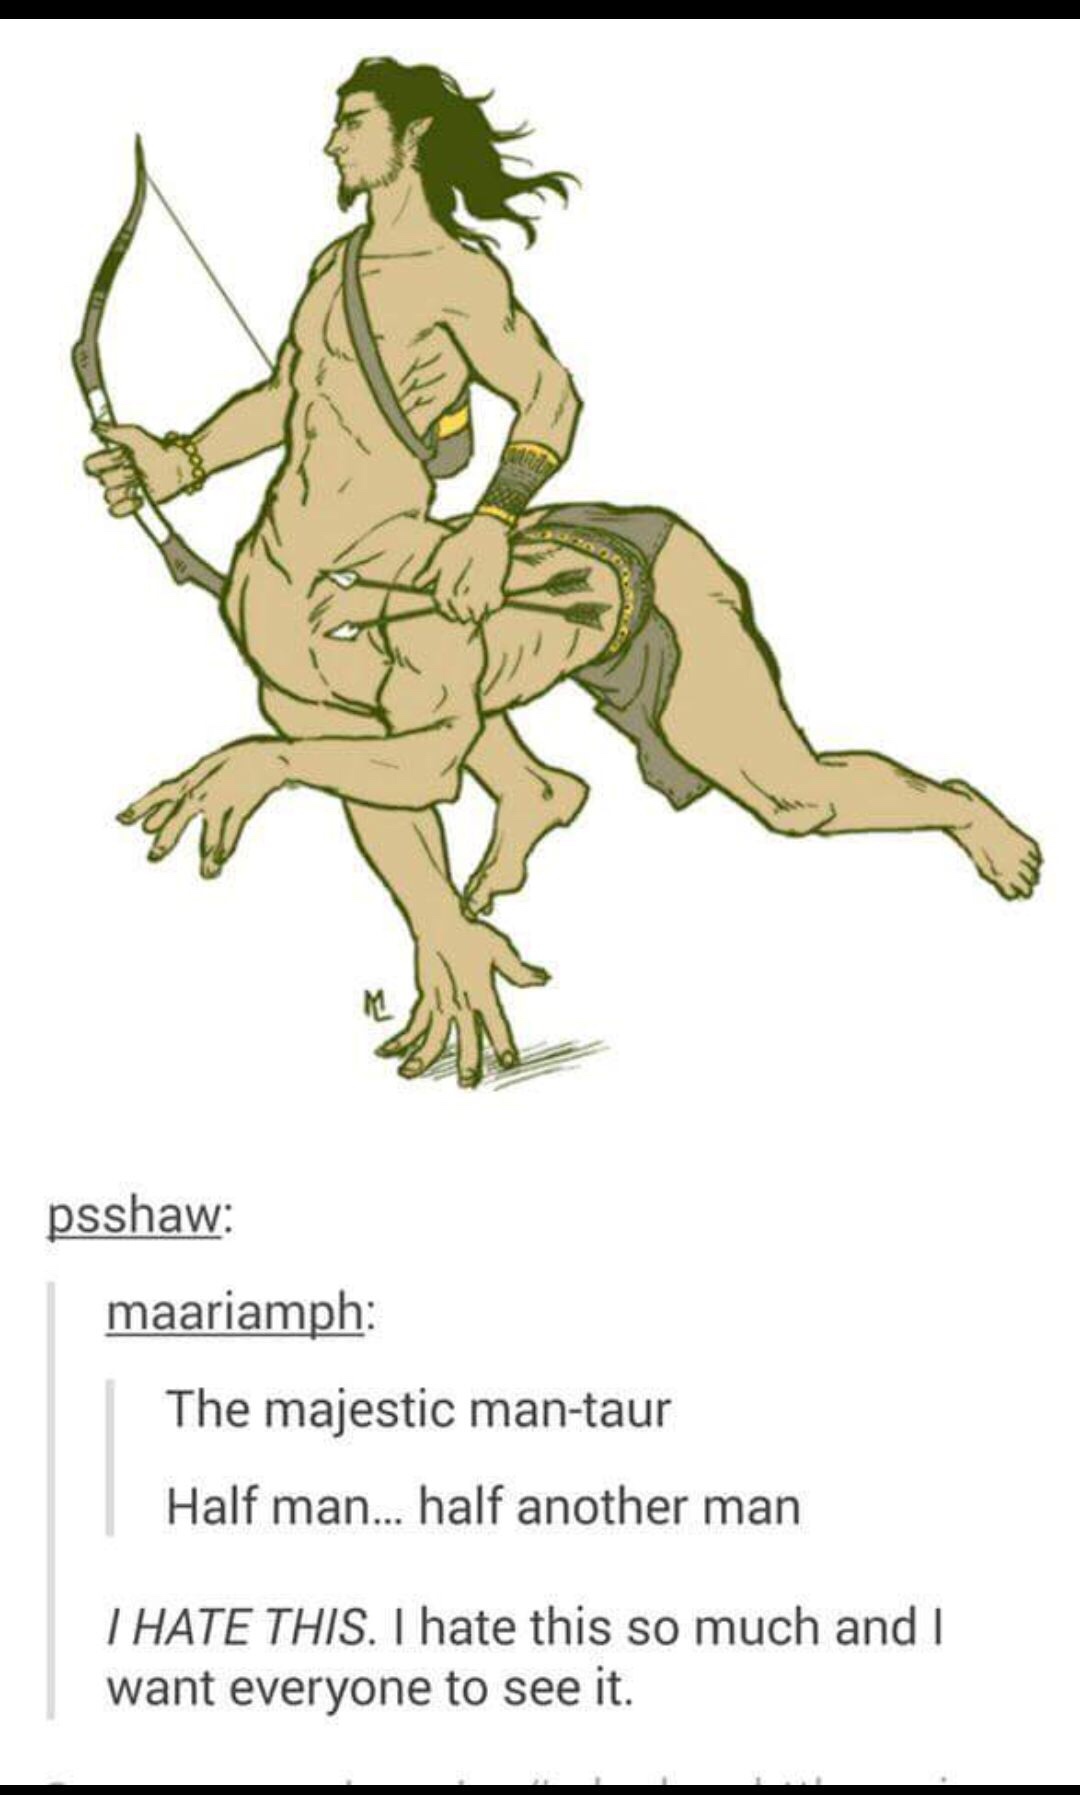 memes - mantaur half man half another man - psshaw maariamph The majestic mantaur Half man... half another man Thate This. I hate this so much and I want everyone to see it.